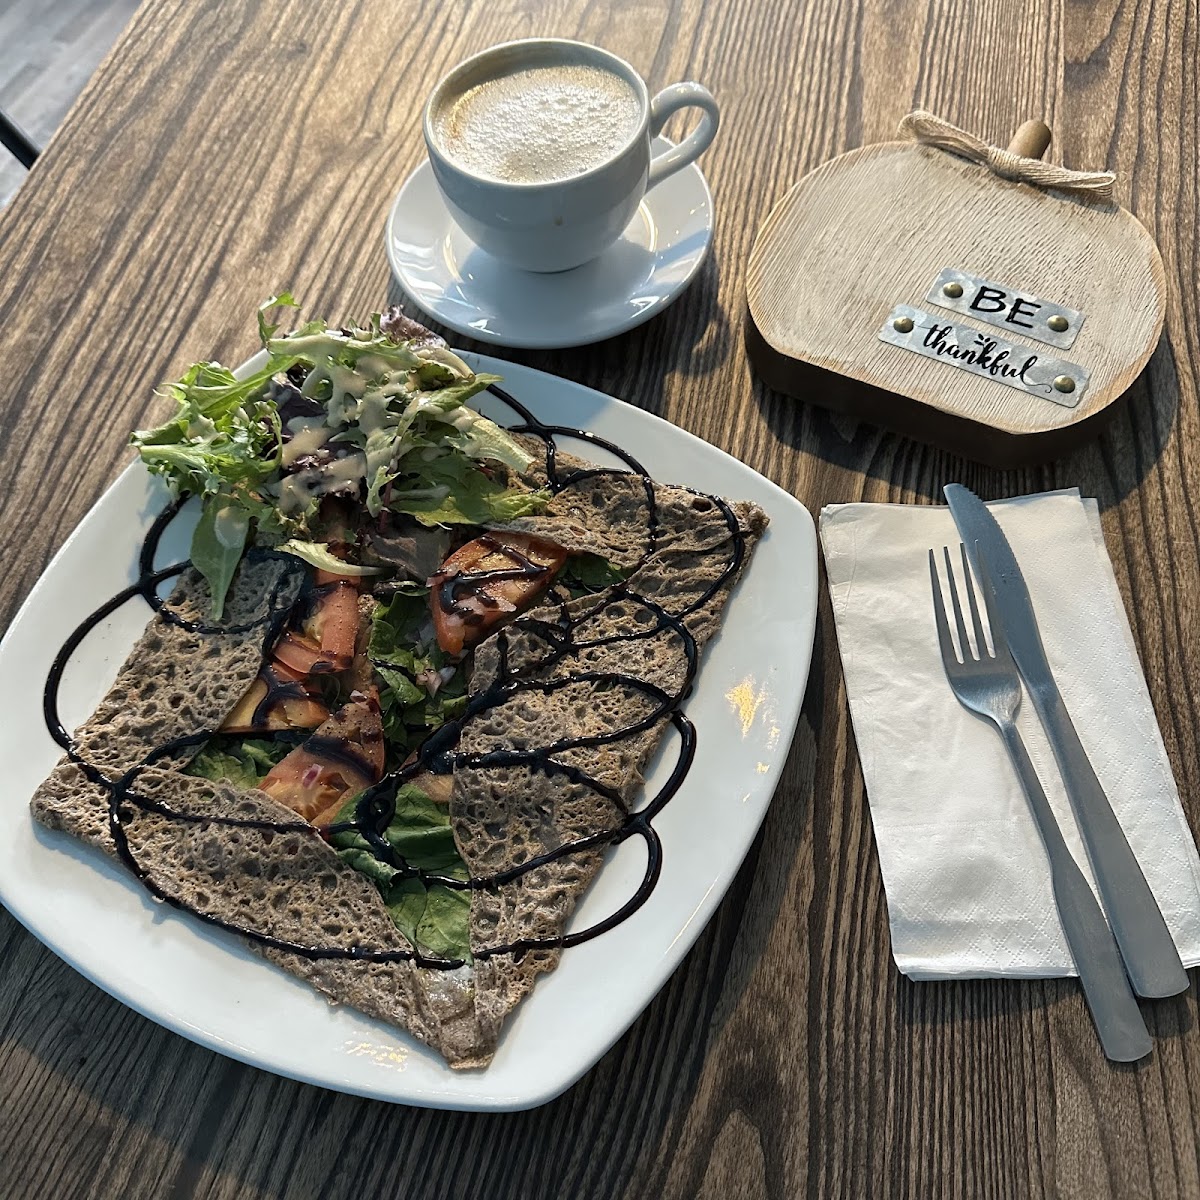 Gluten Free, Dairy free savory crepe with latte for lunch